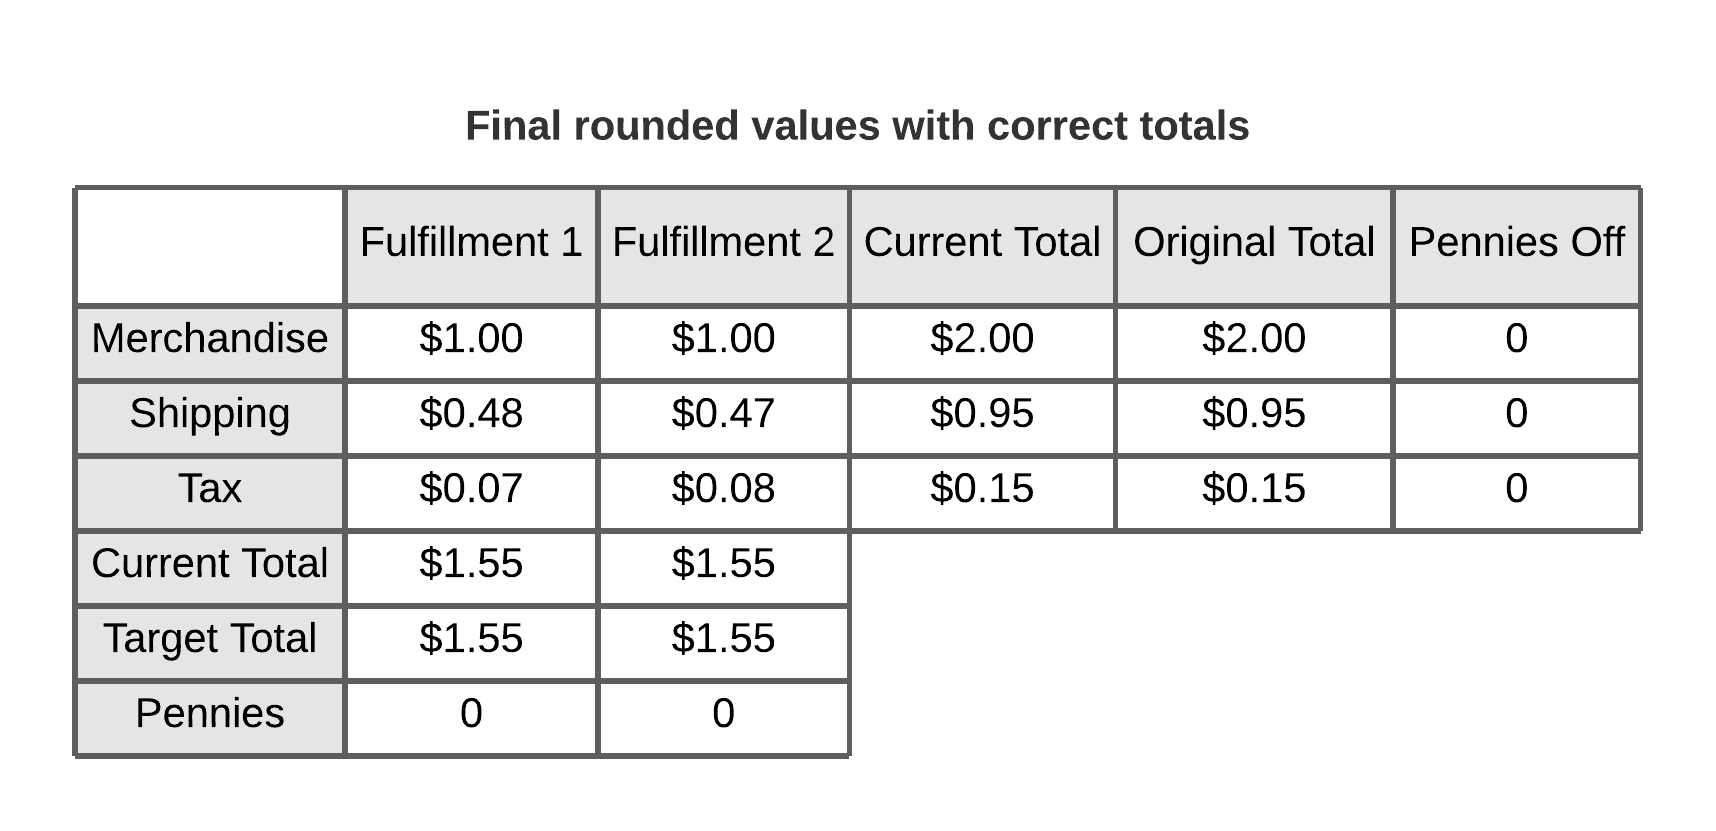 Final rounded values with correct totals